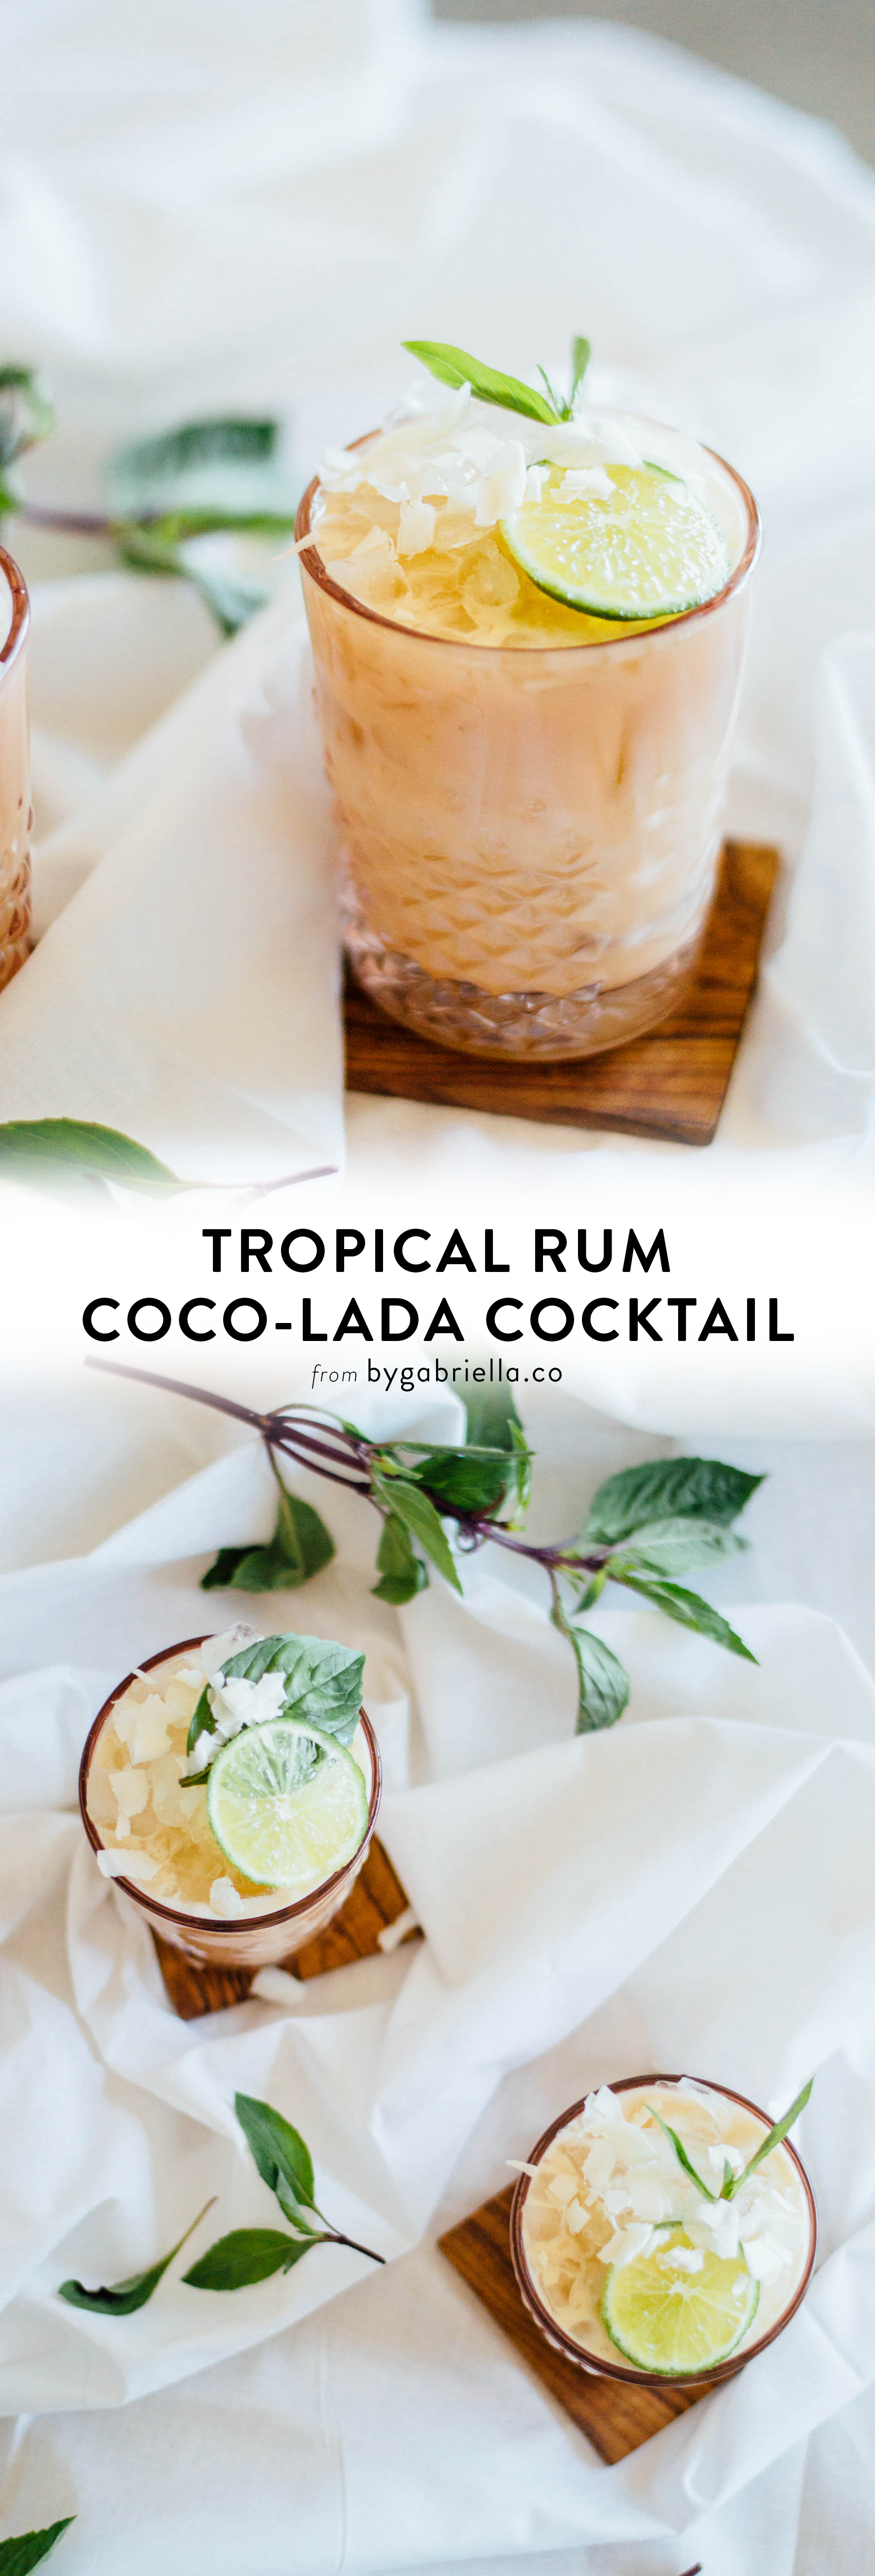 Tropical Rum Coco-Lada cocktail recipe with tea brewed specifically for cocktails! | bygabriella.co